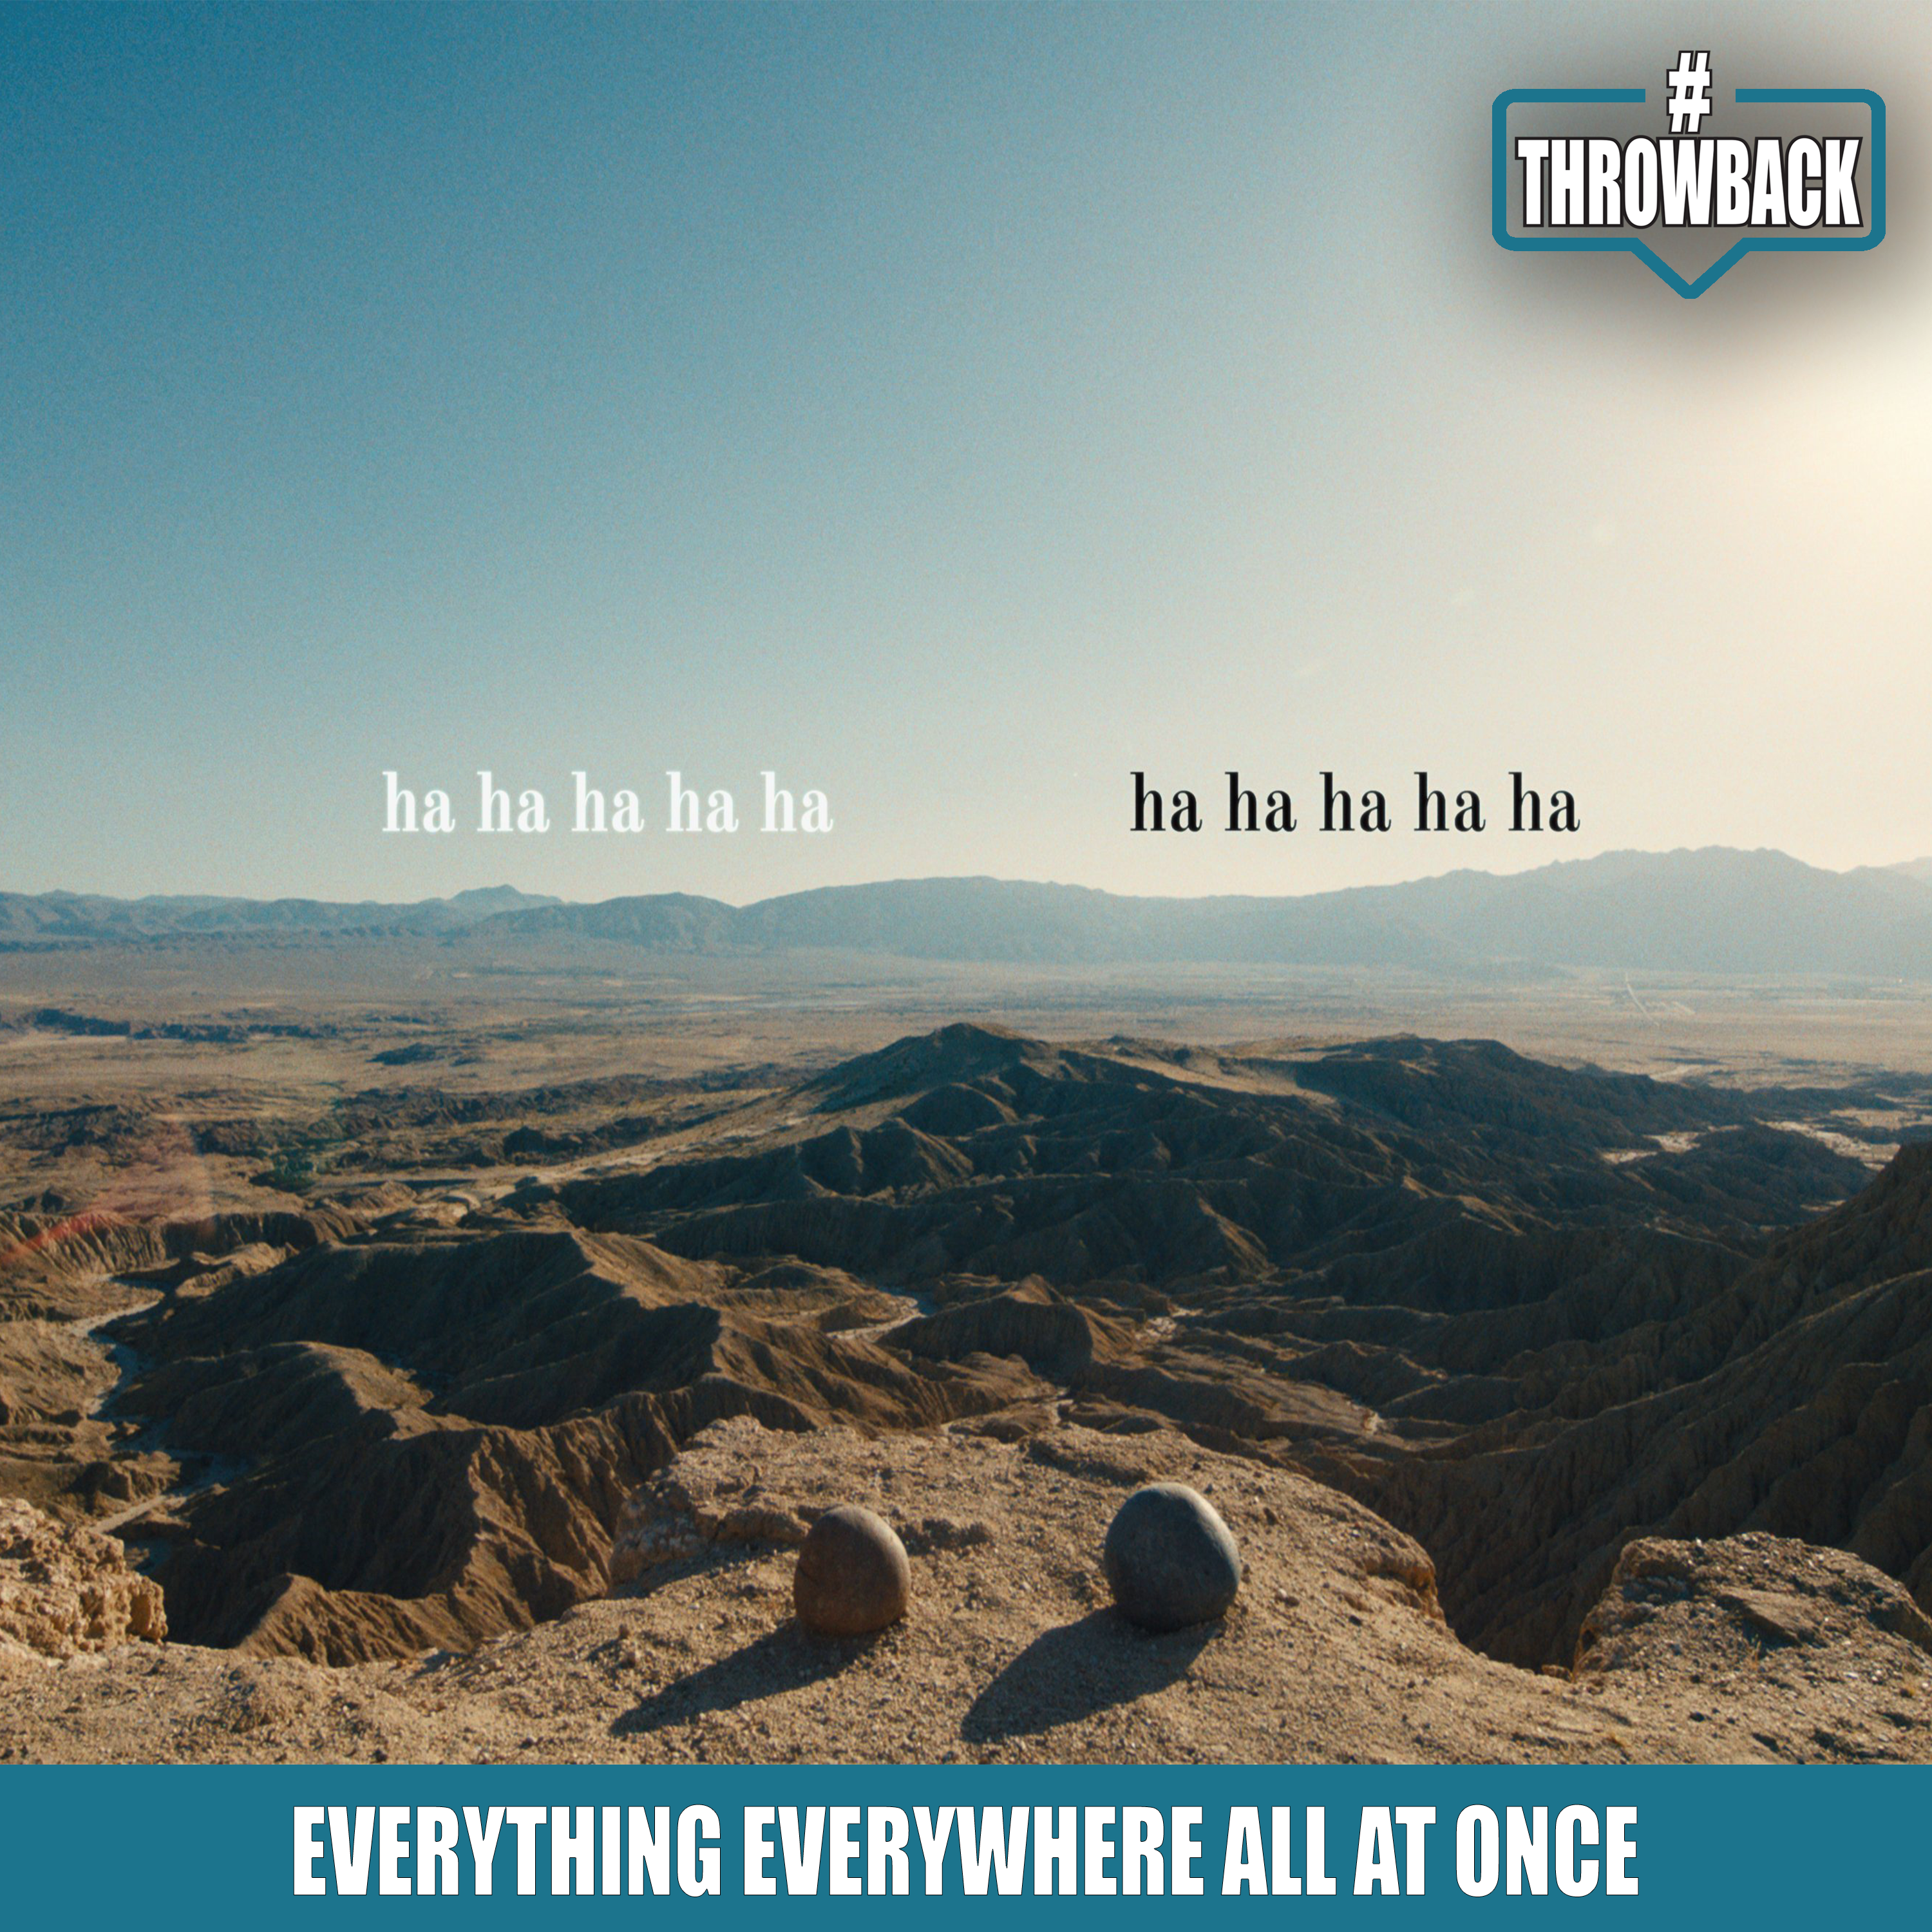 Throwback #116 – Everything Everywhere All Once